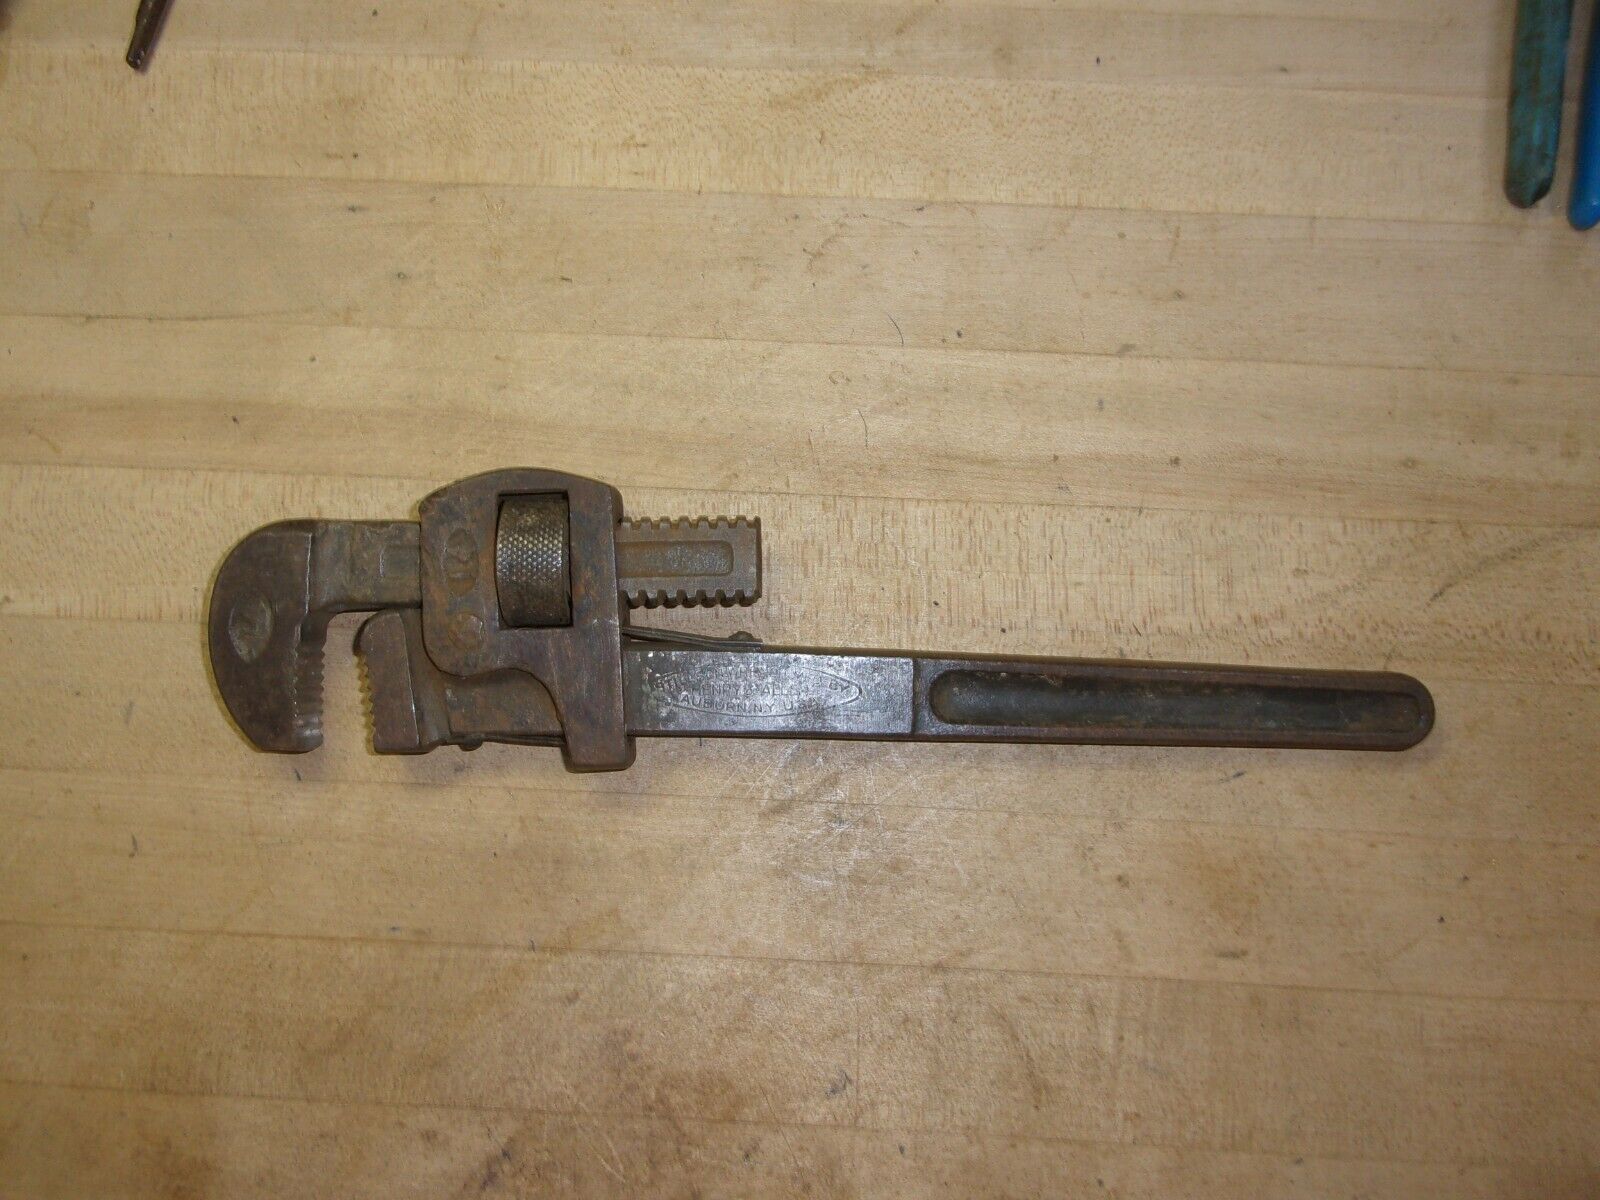 Vtg. Stillson Wrench MFG. by Henry & Allen Pipe Wrench #14 USA Drop Forged Steel